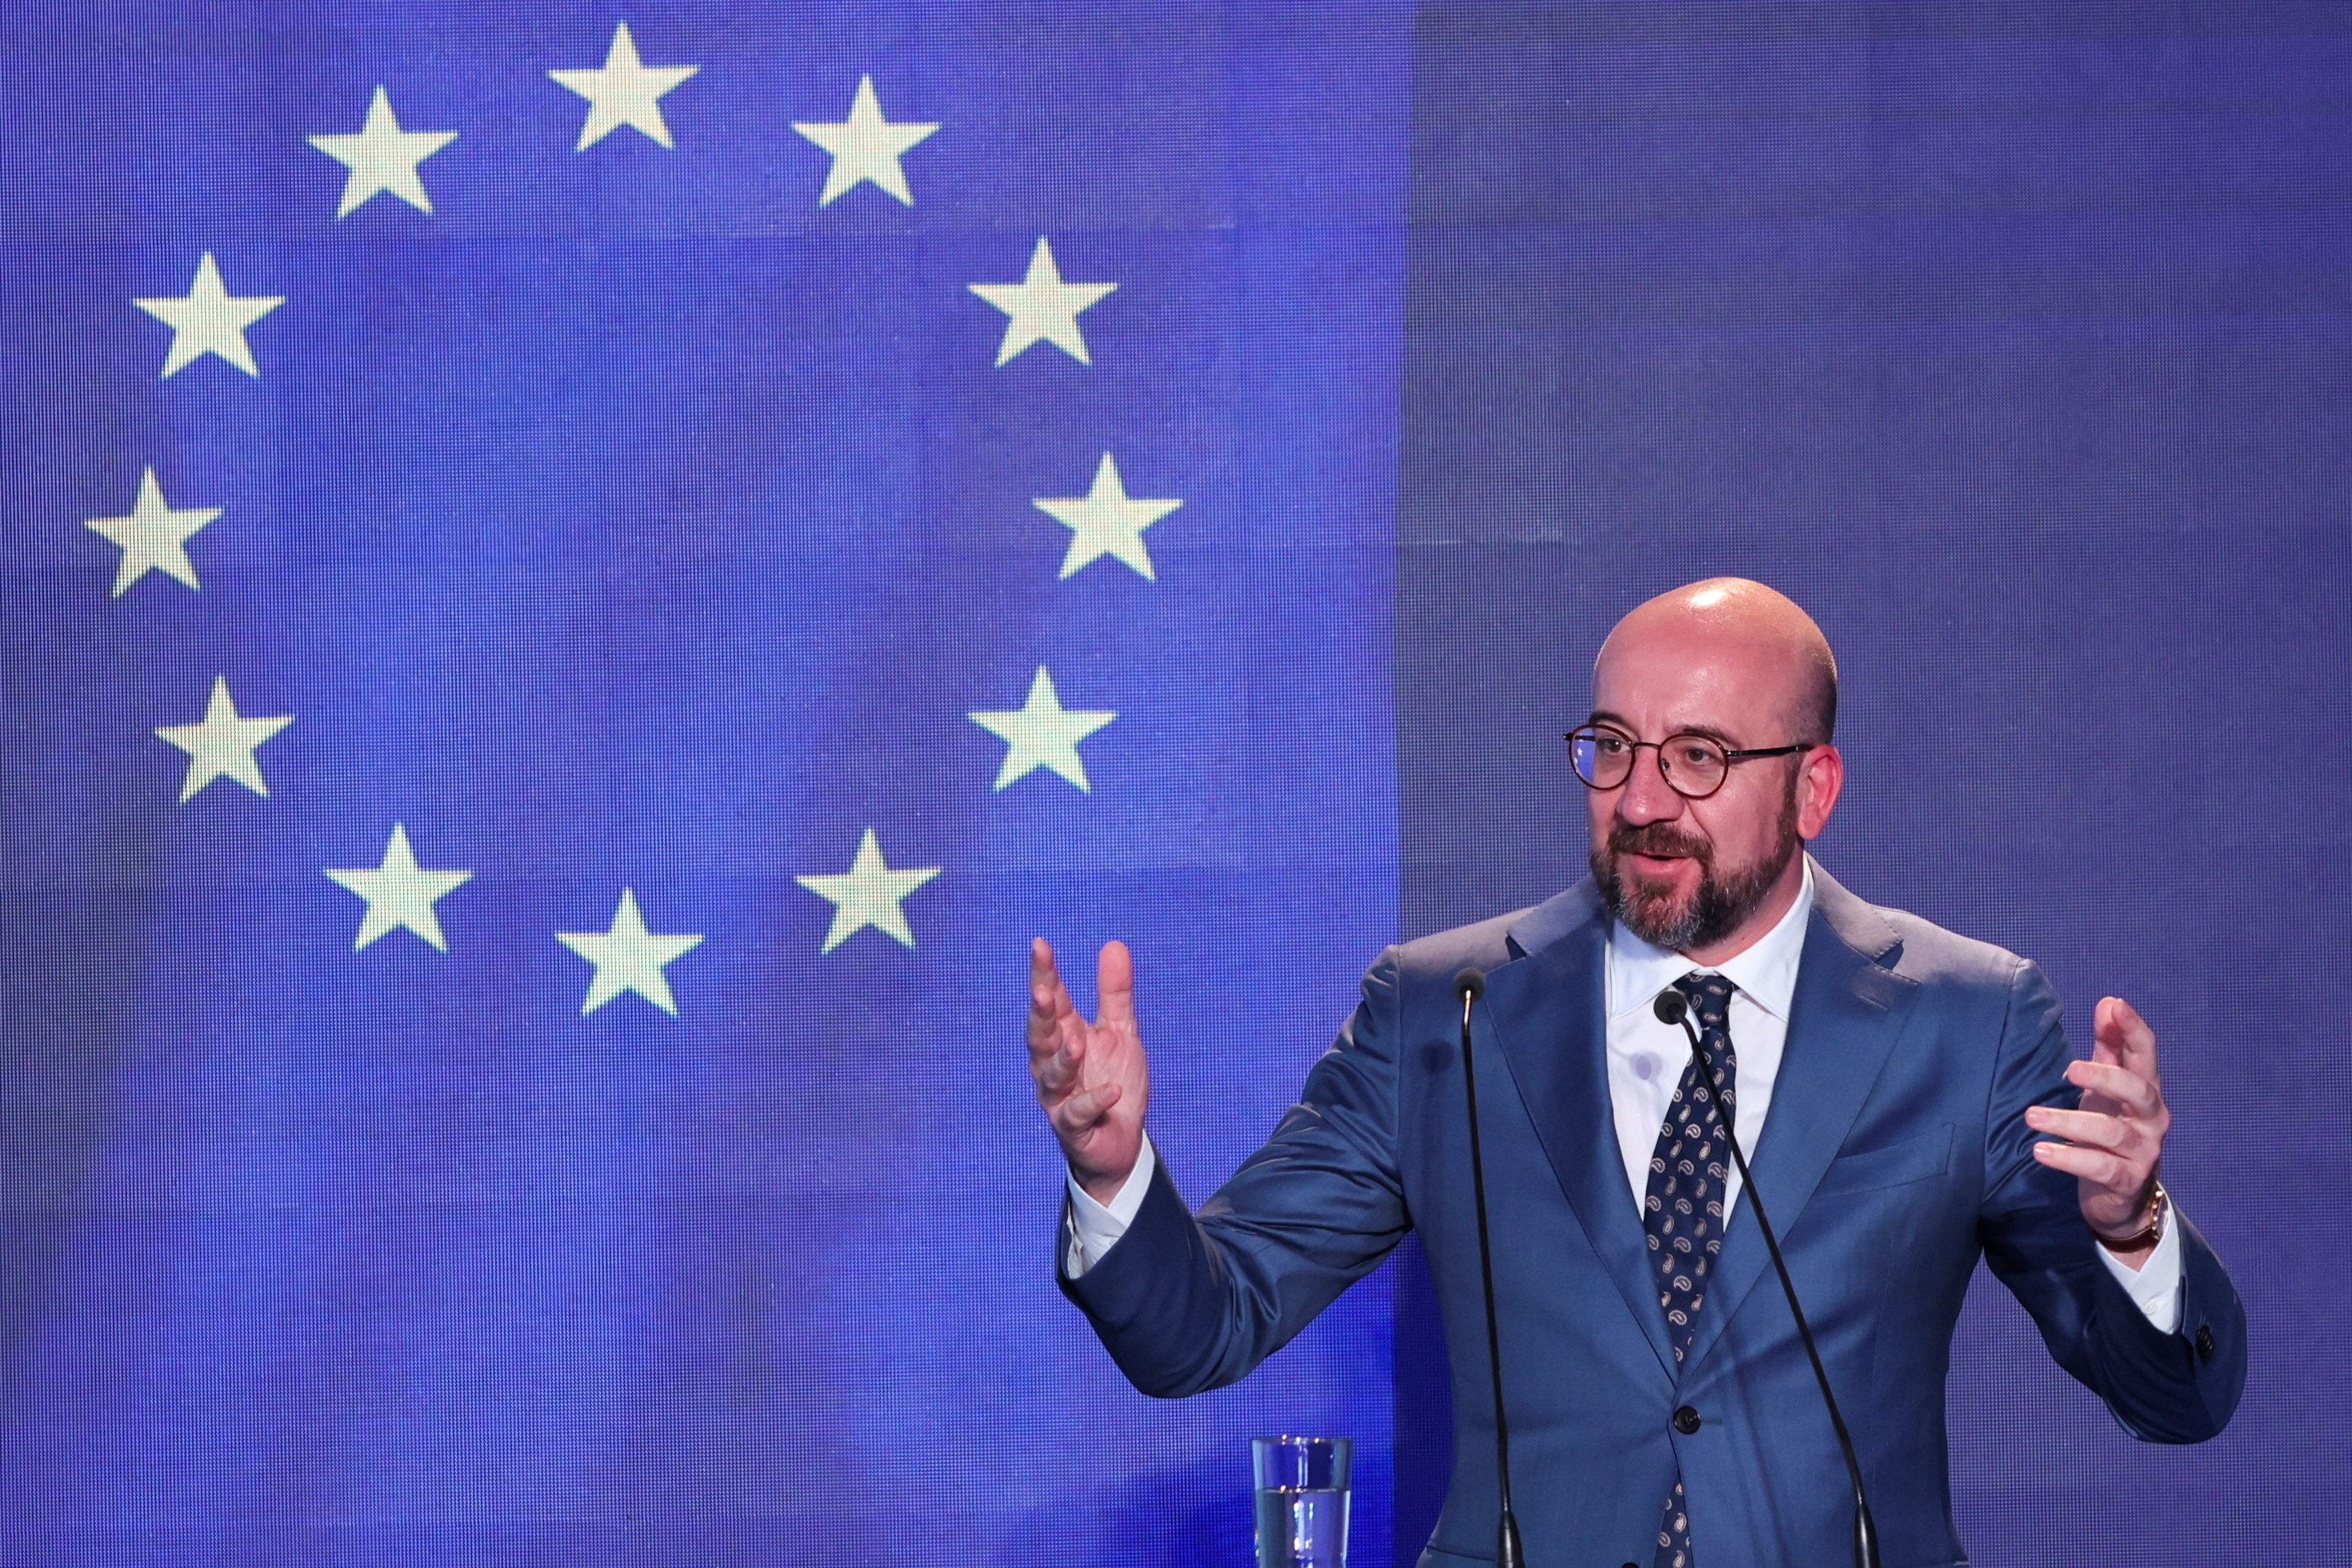 European Council President Charles Michel speaks during an event in Alexandroupolis